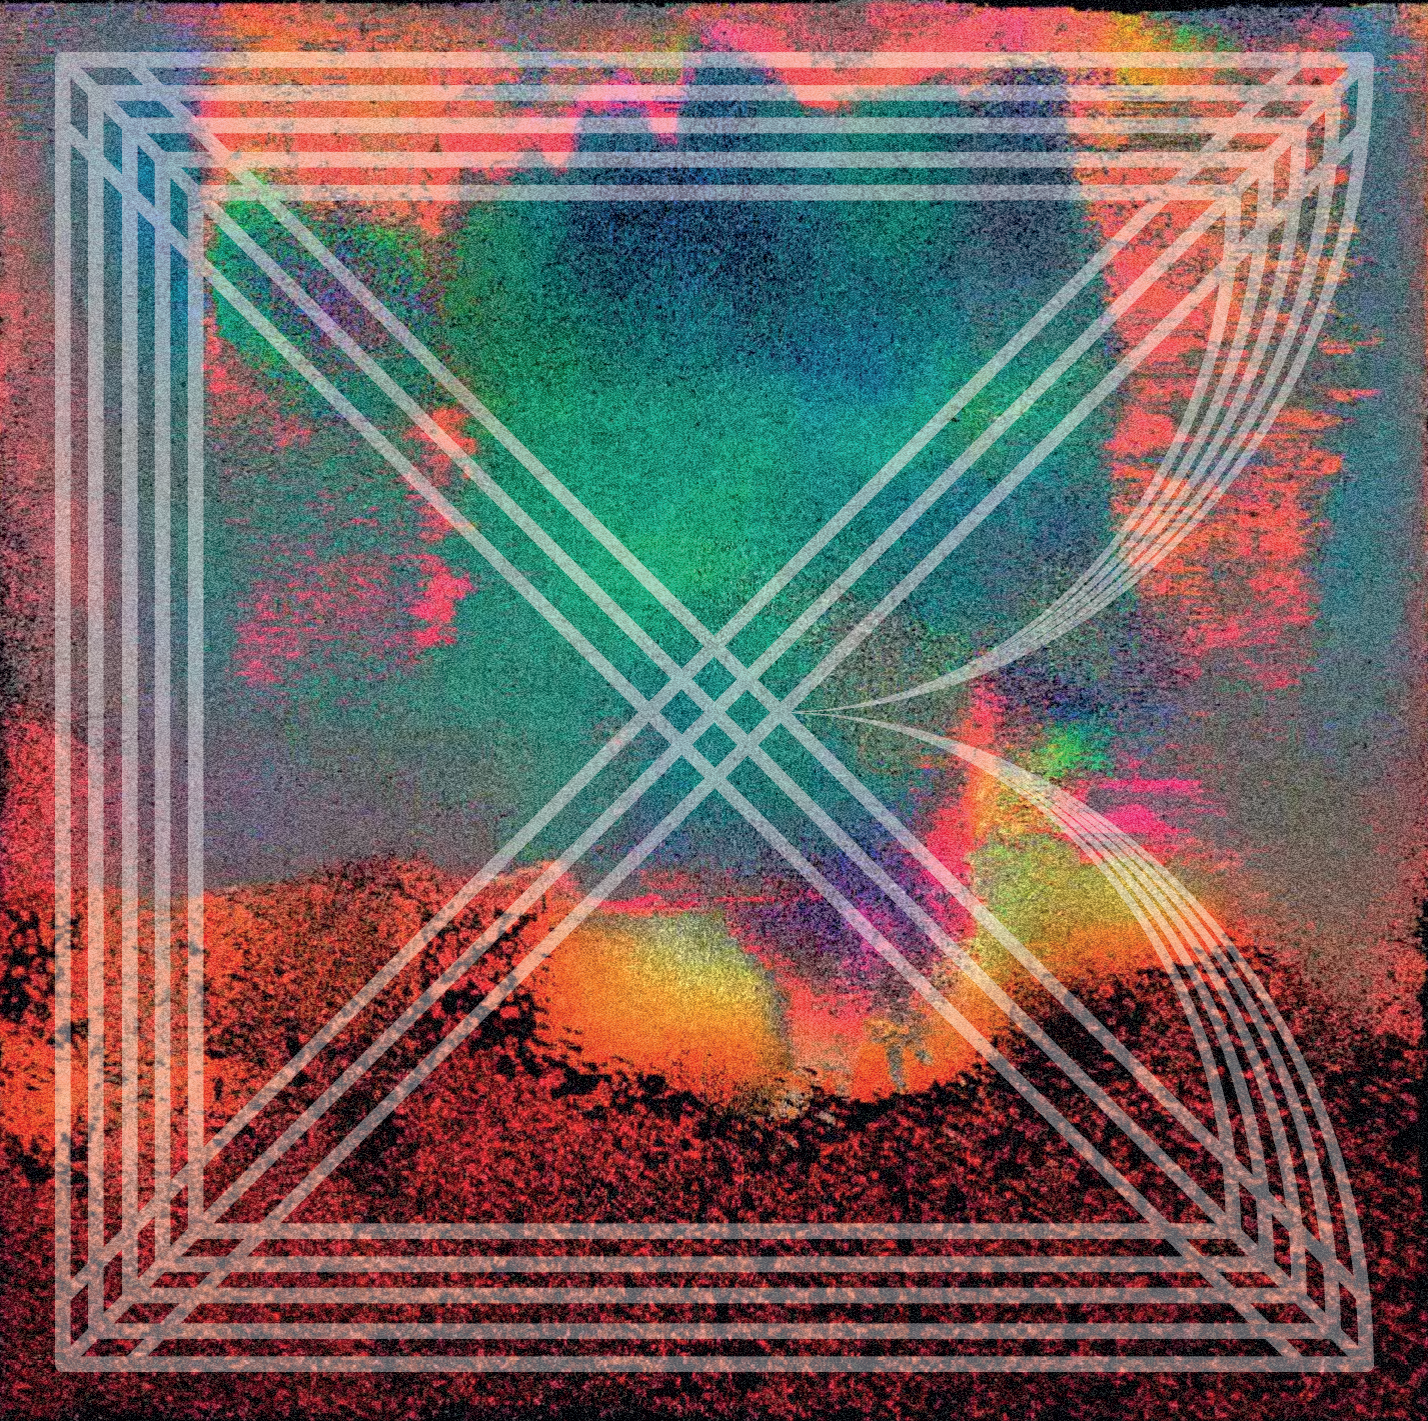 Bxentric-Ep-Cover-e1436715842617.png